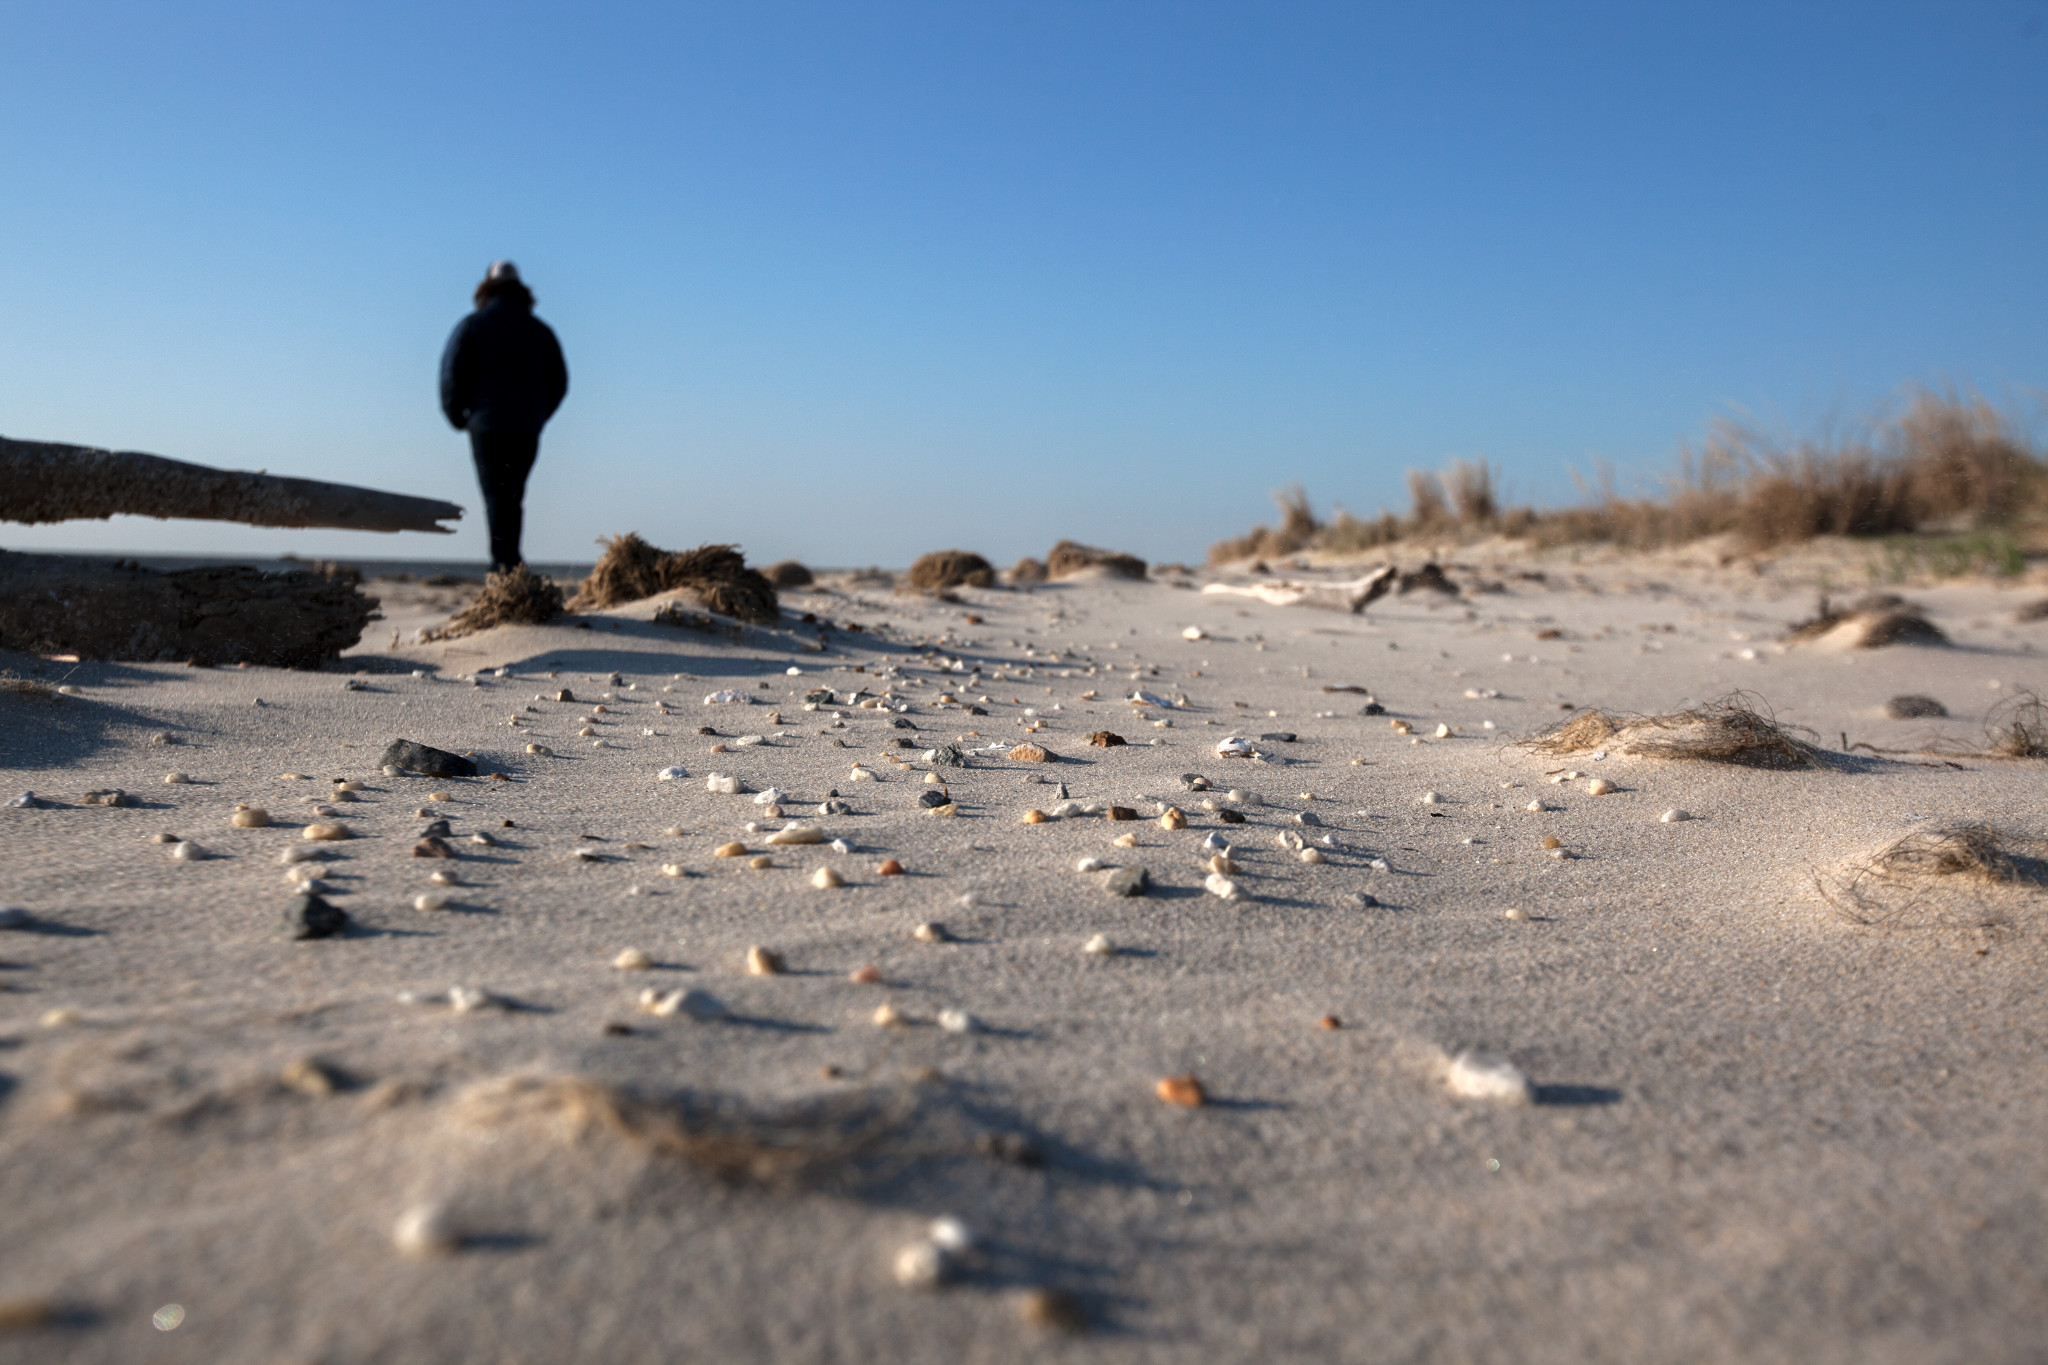 A person wearing a winter coat stands at the edge of a sandy beach filled with small shells.